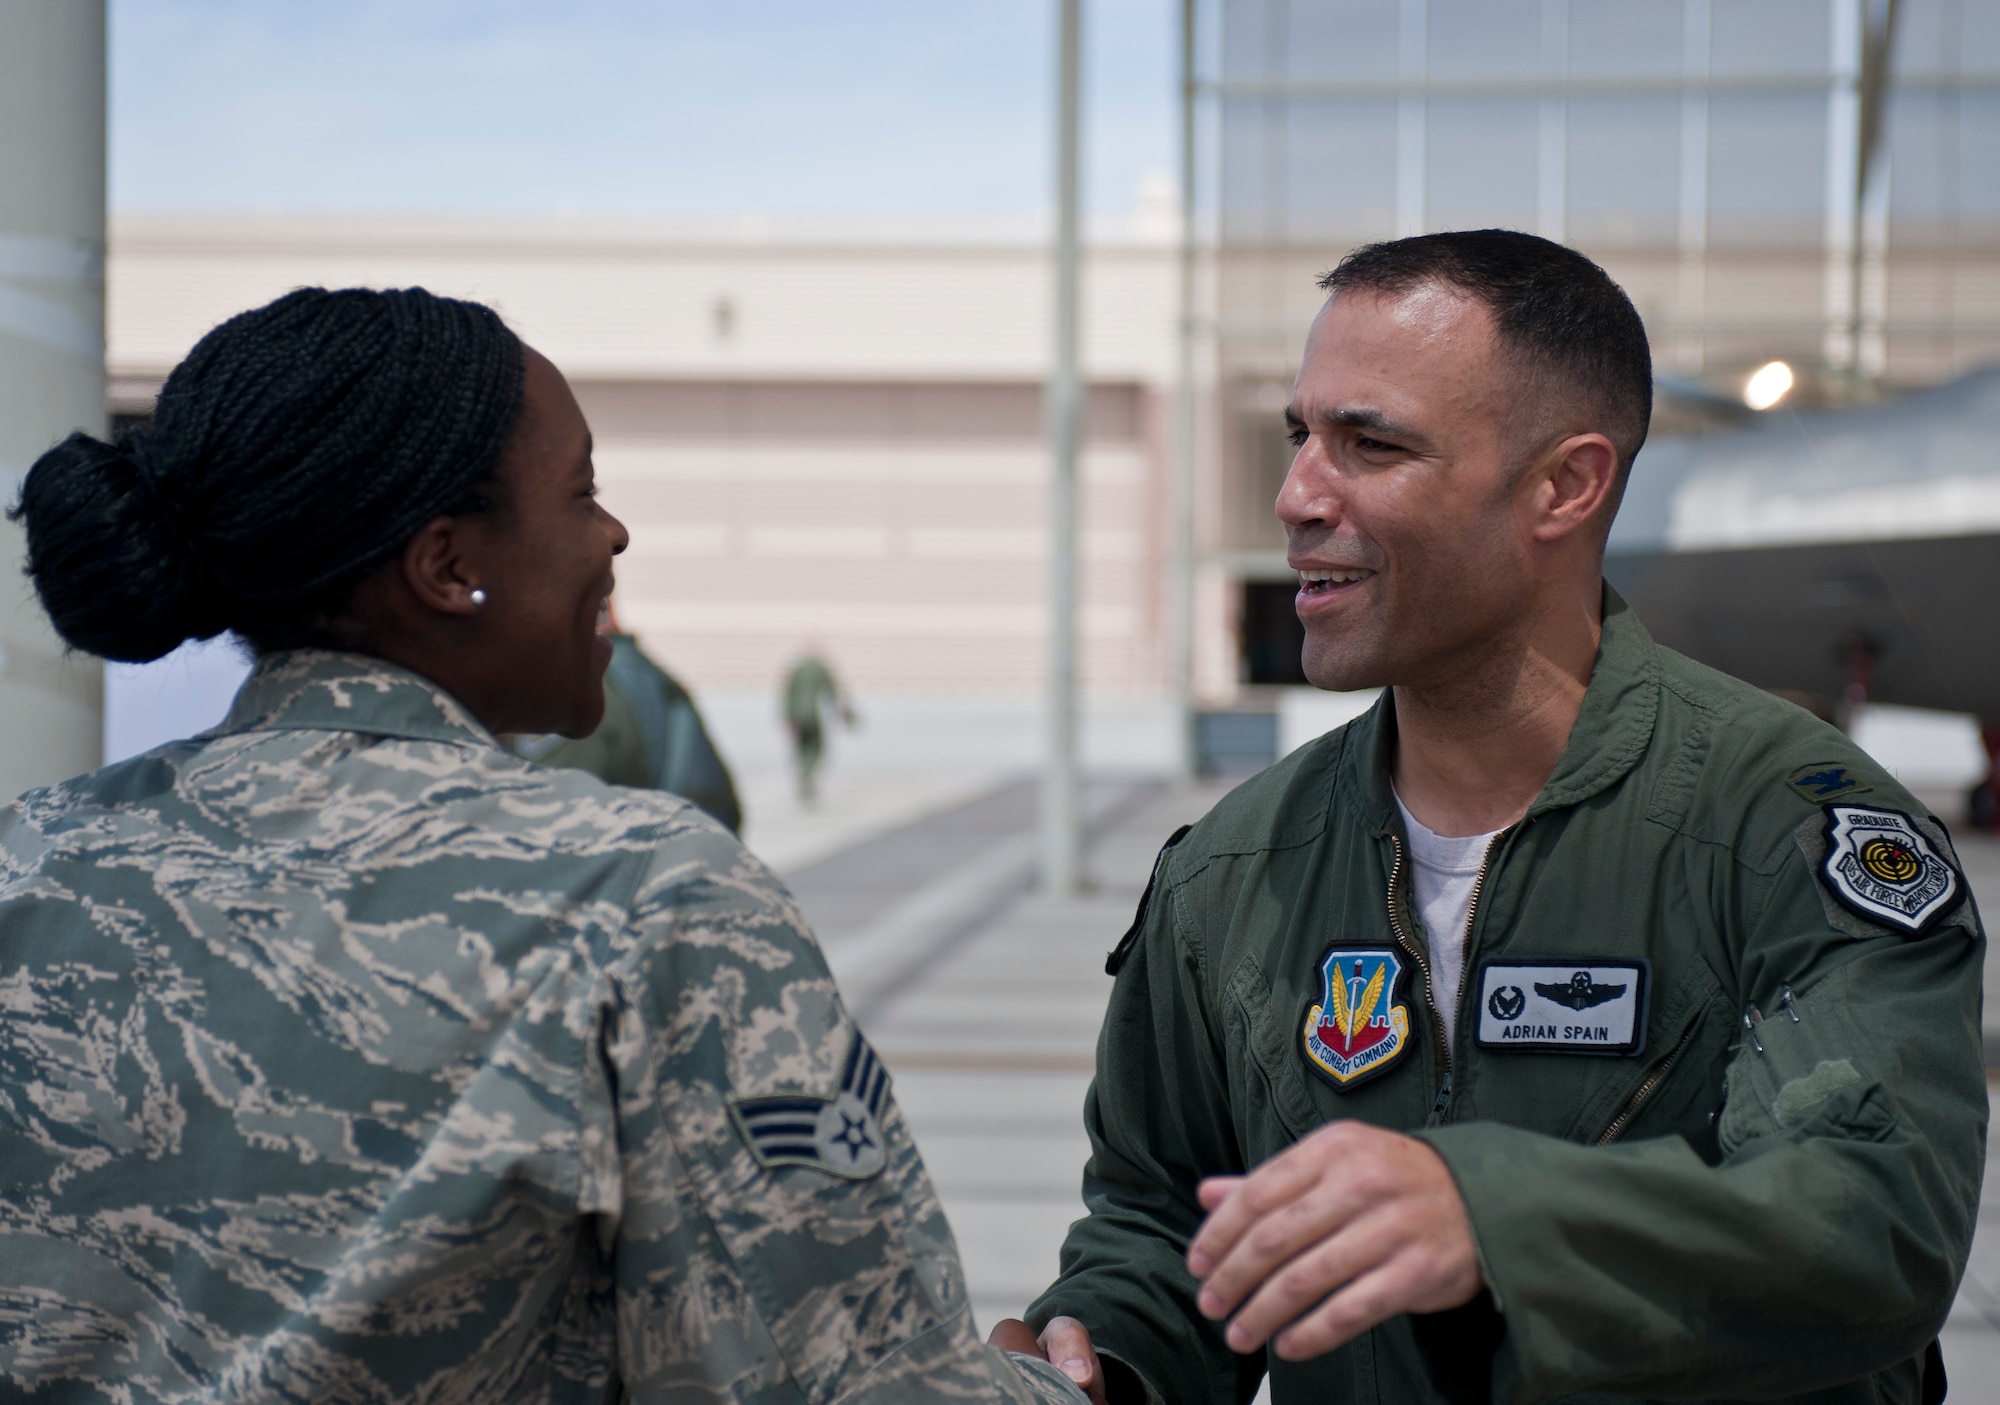 Col. Adrian Spain, U.S. Air Force Weapons School commandant, greets an Airman after his final flight as the USAFWS commandant at Nellis Air Force Base, Nev., May 11, 2015. Following his flight, Airmen from the USAFWS thanked Spain for the job he’s done serving as their commandant. (U.S. Air Force photo by Staff Sgt. Siuta B. Ika)